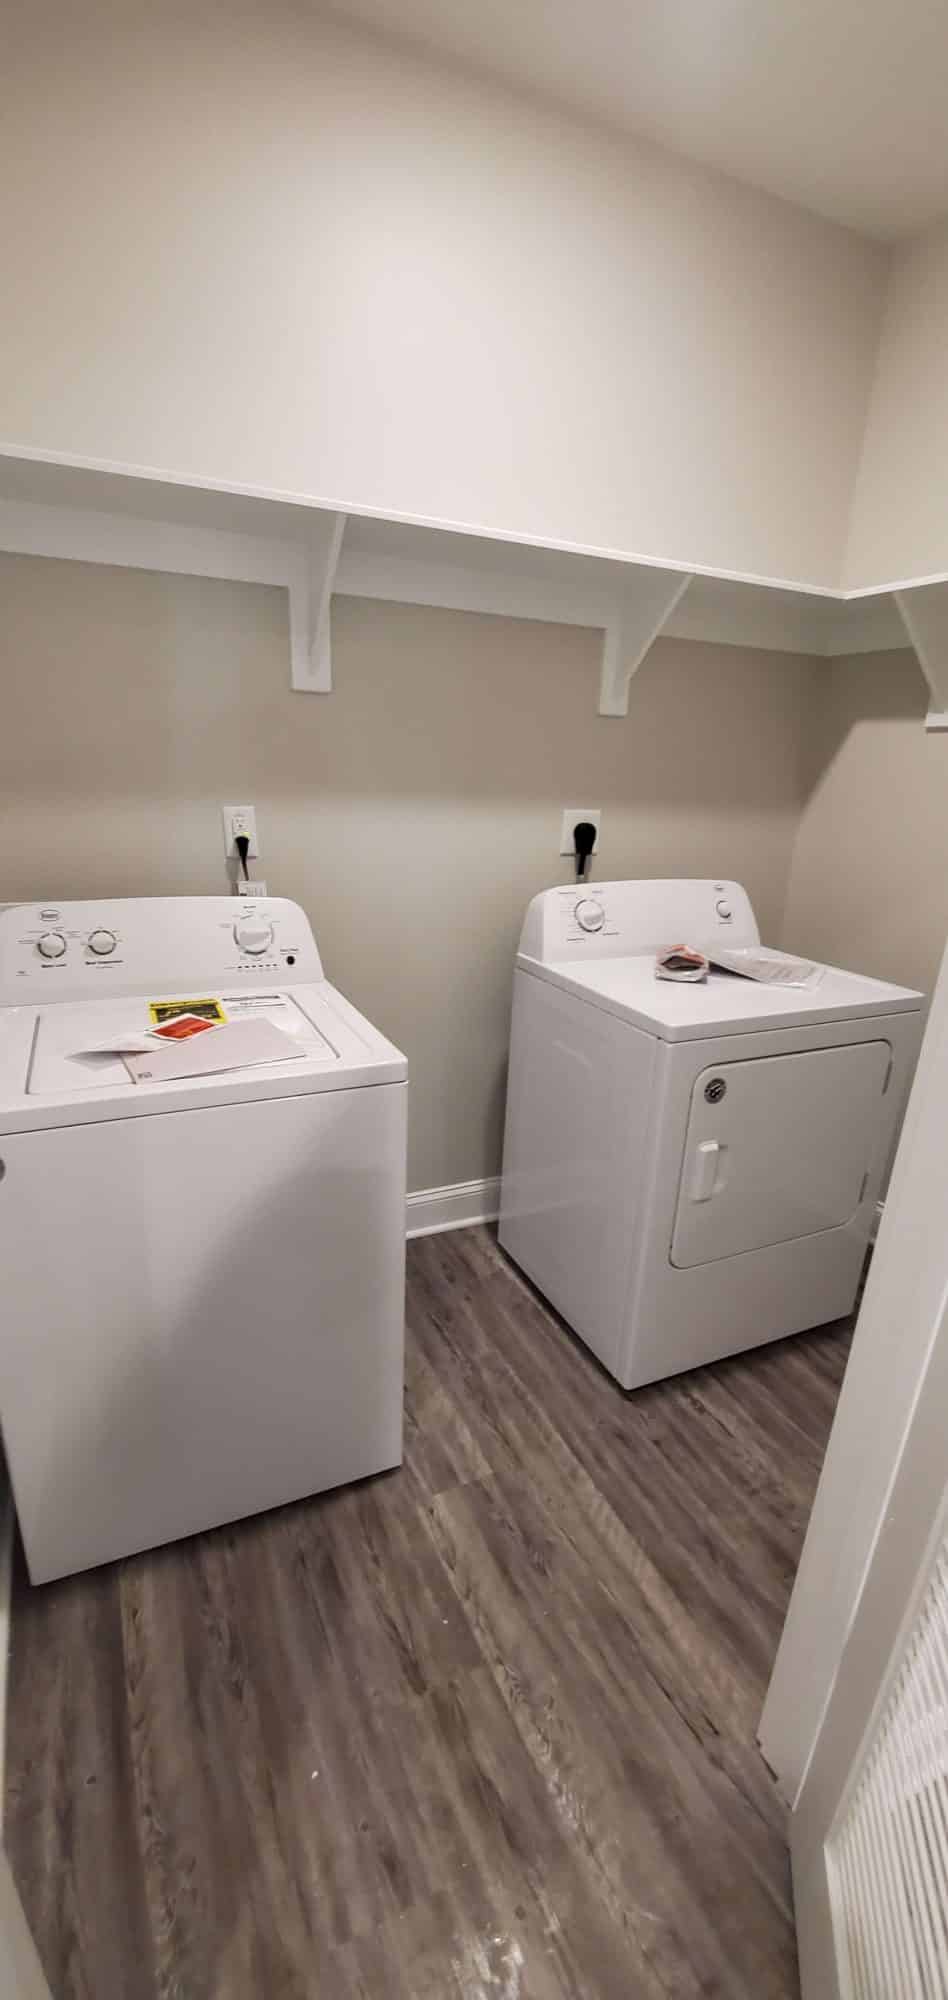 raleigh off campus apartments marcom st off campus apartments near nc state university in unit washer and dryer